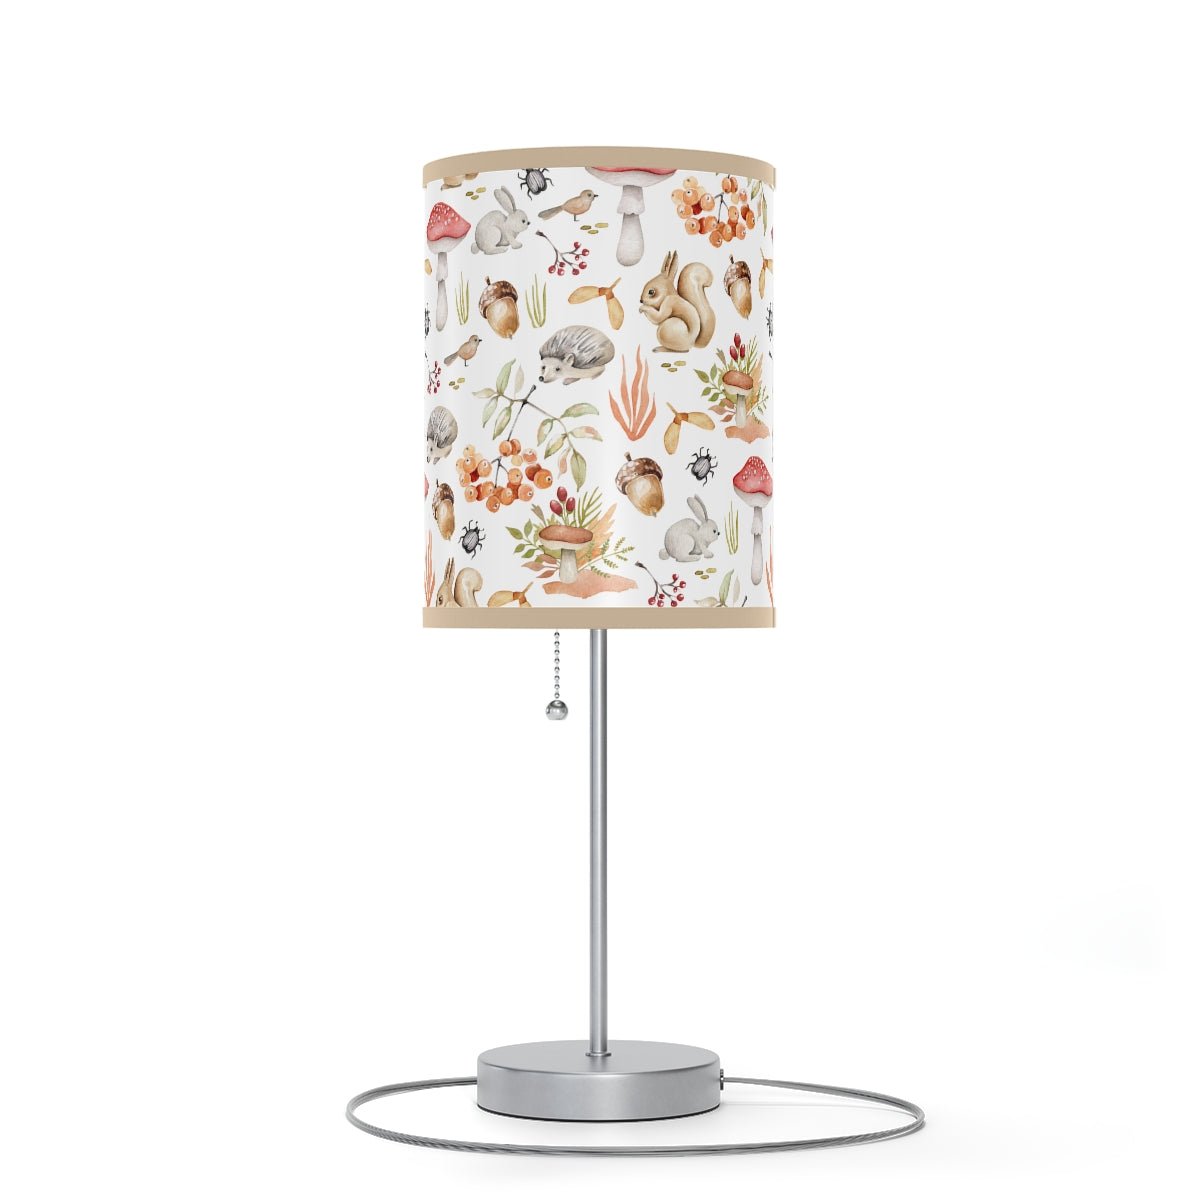 Fall Forest Animals Table Lamp - Puffin Lime